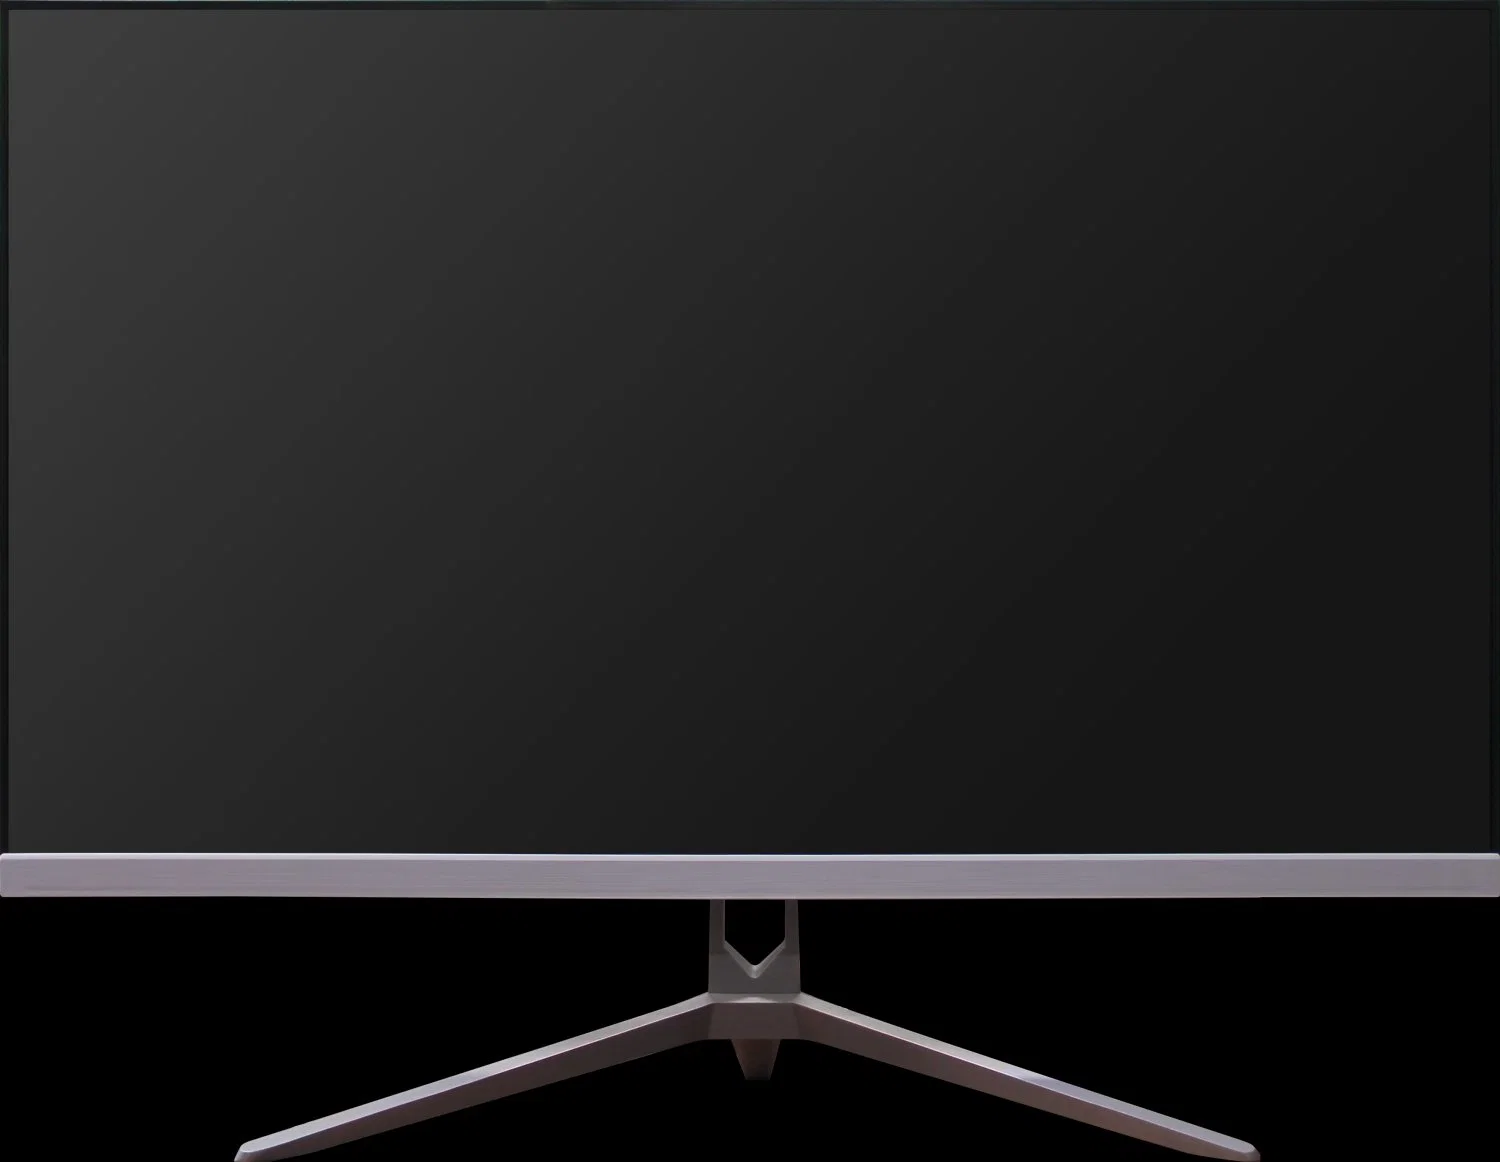 Aevision 27-Inch Full HD IPS Monitor with Frameless Design, Speaker for Work and Study at Home